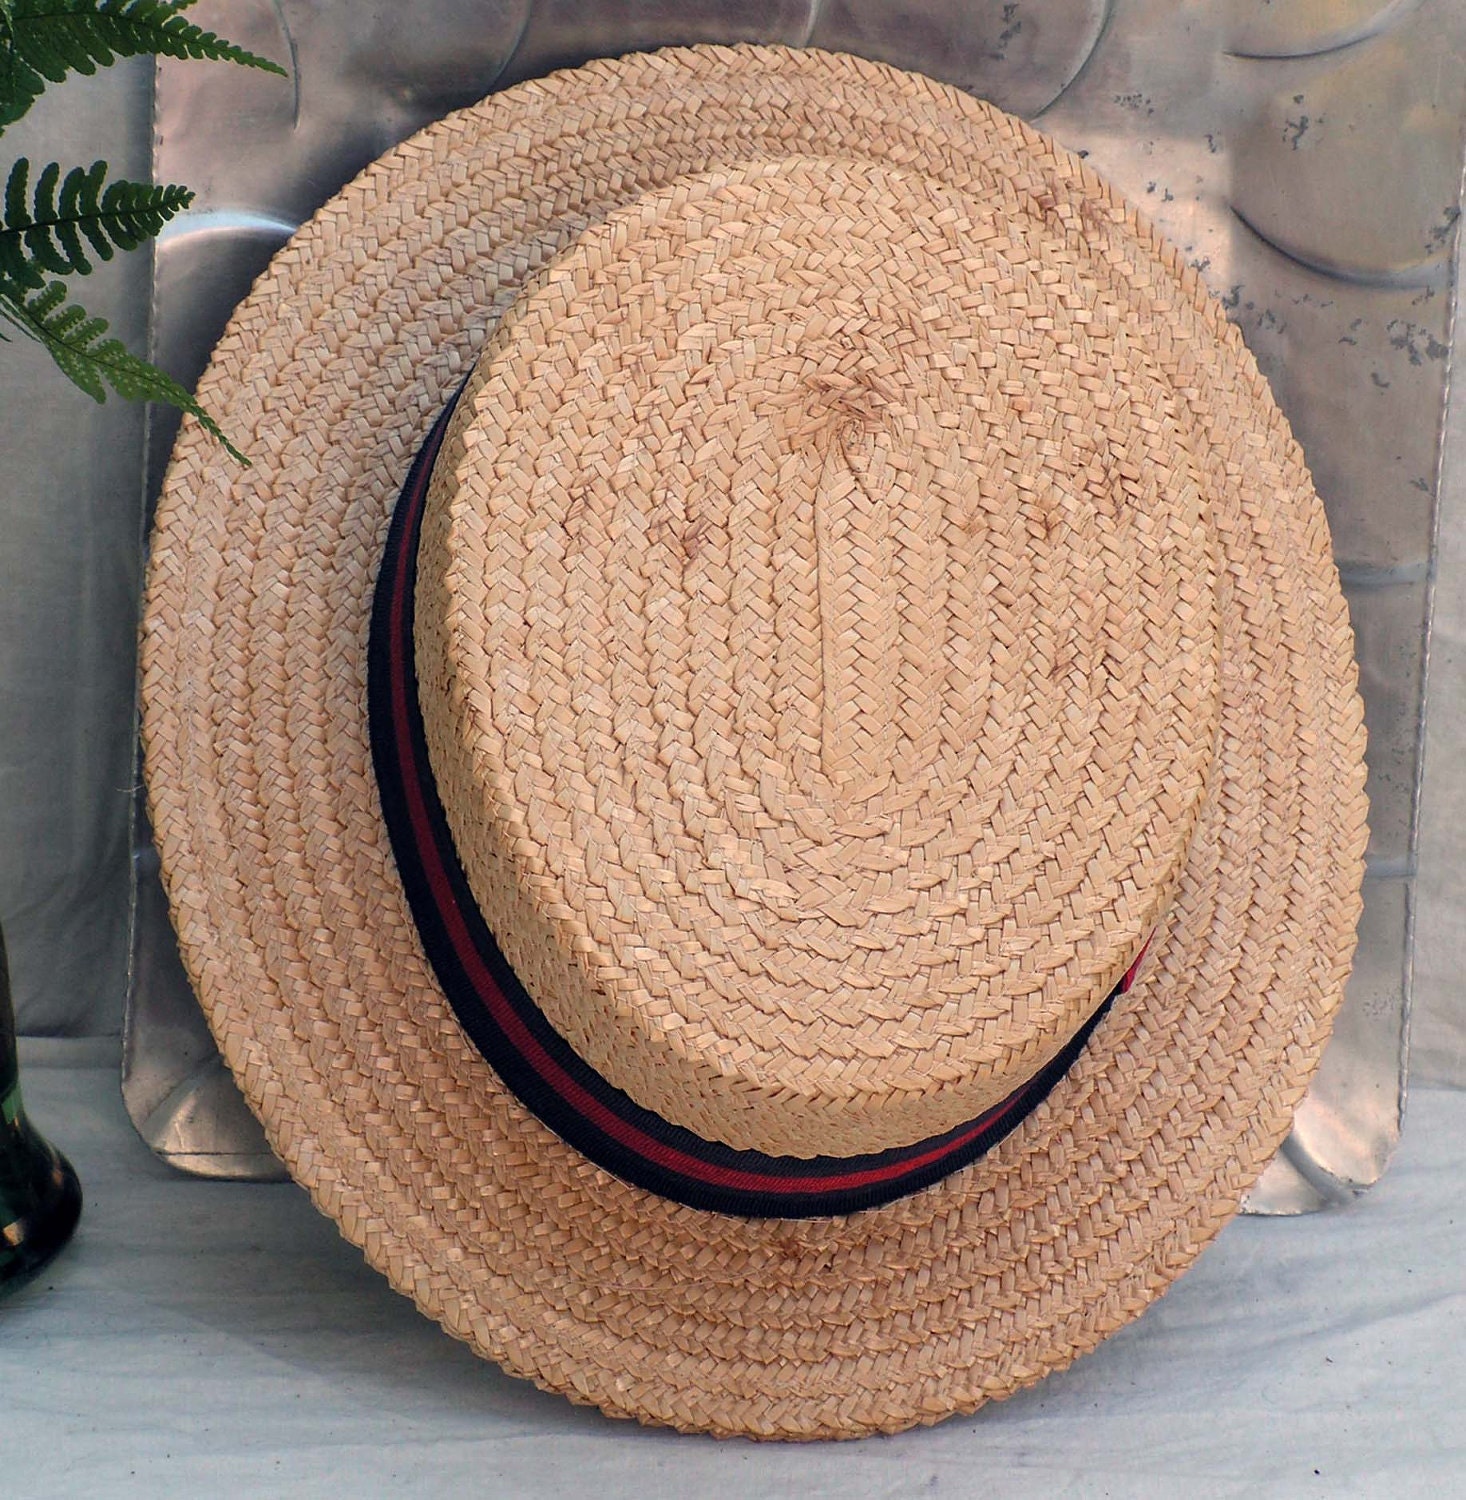 Men's Boater Hat Palm Straw Italy Size 7.25 Euro Size 58